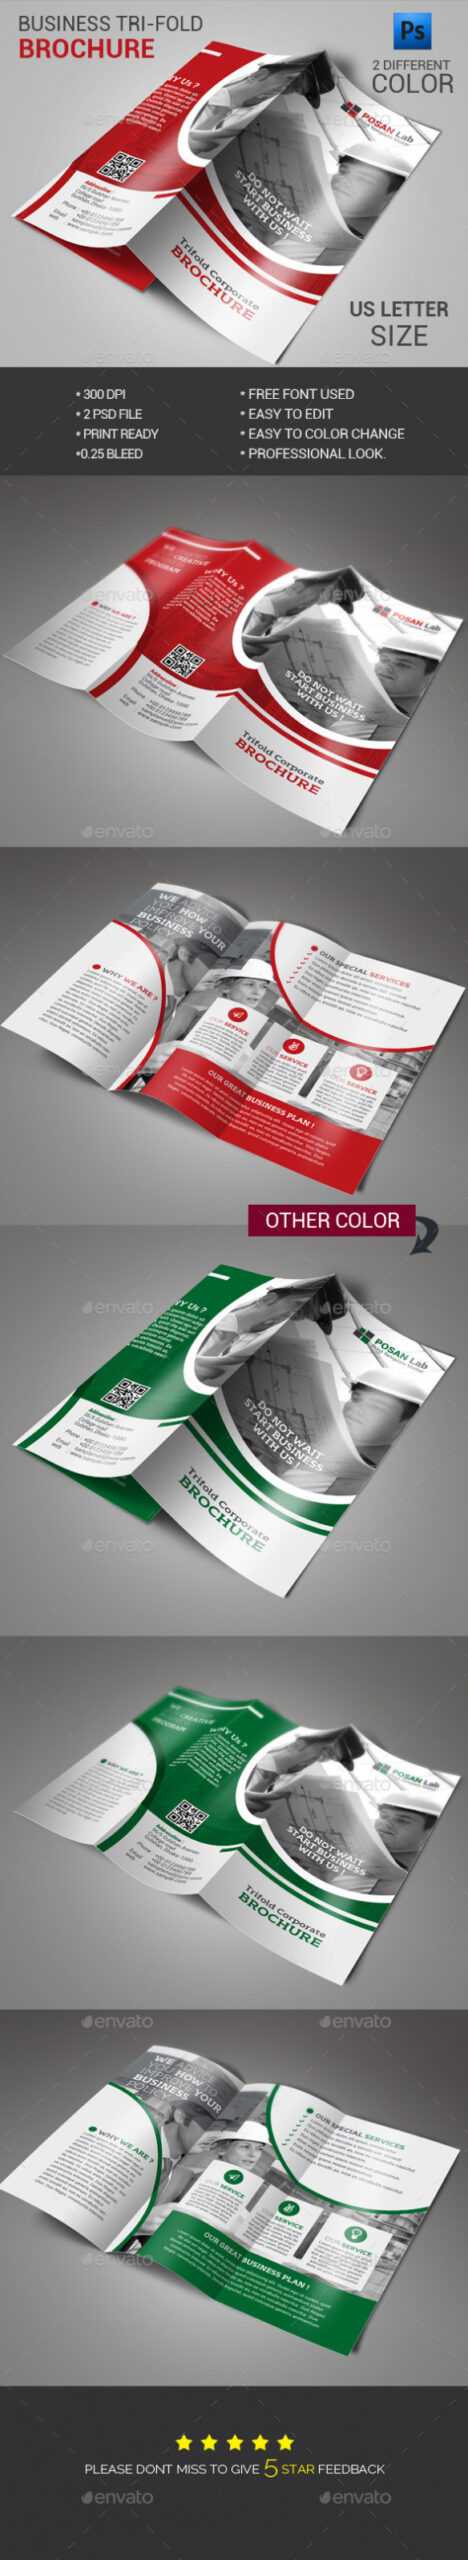 Corporate Engineering Trifold Brochure pertaining to Engineering Brochure Templates